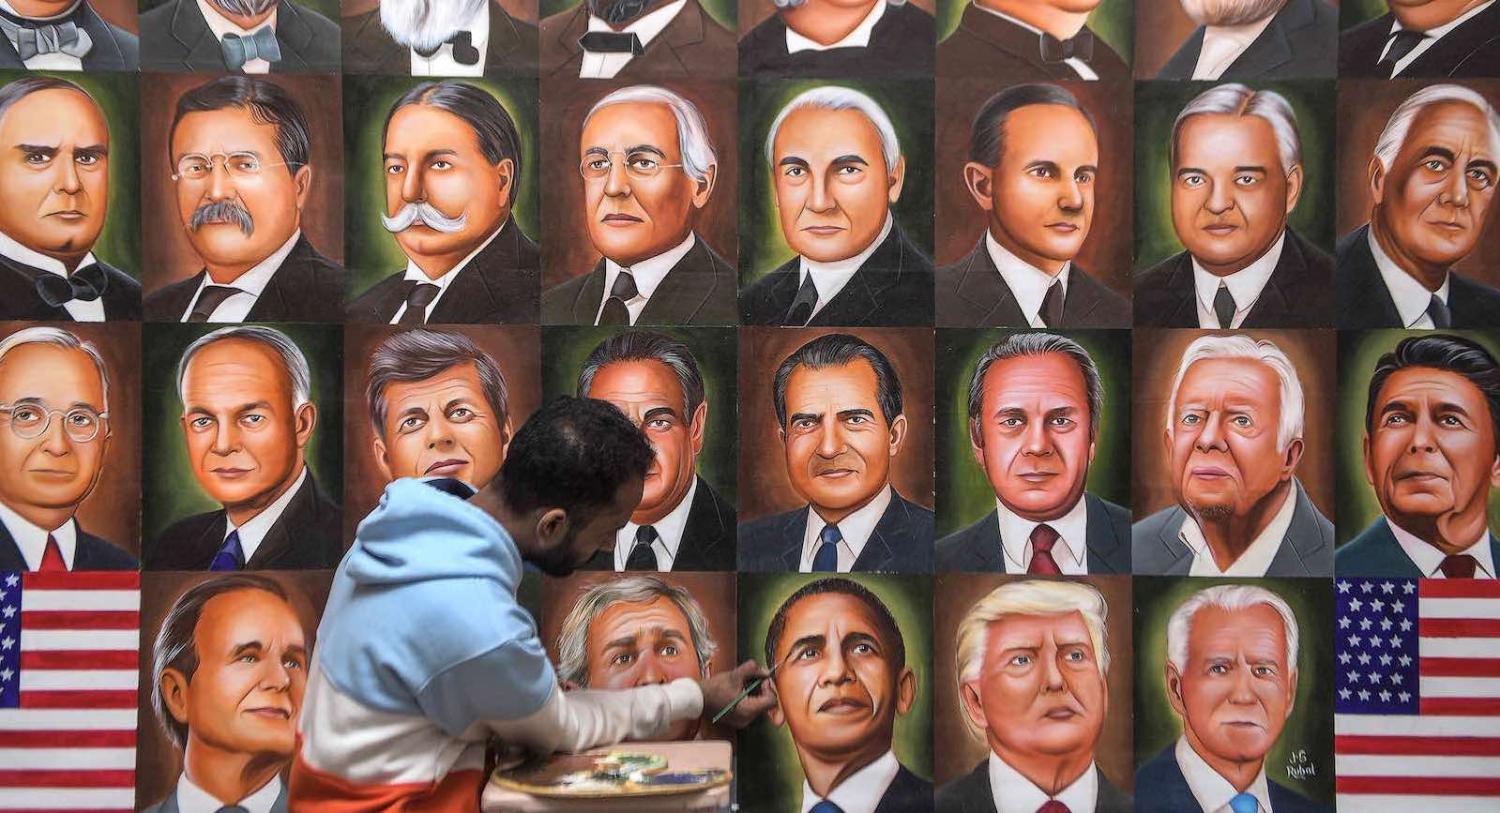 A painter puts the finishing touches on a mural of US presidents in Amritsar, India, 8 November 2020 (Narinder Nanu/AFP via Getty Images)